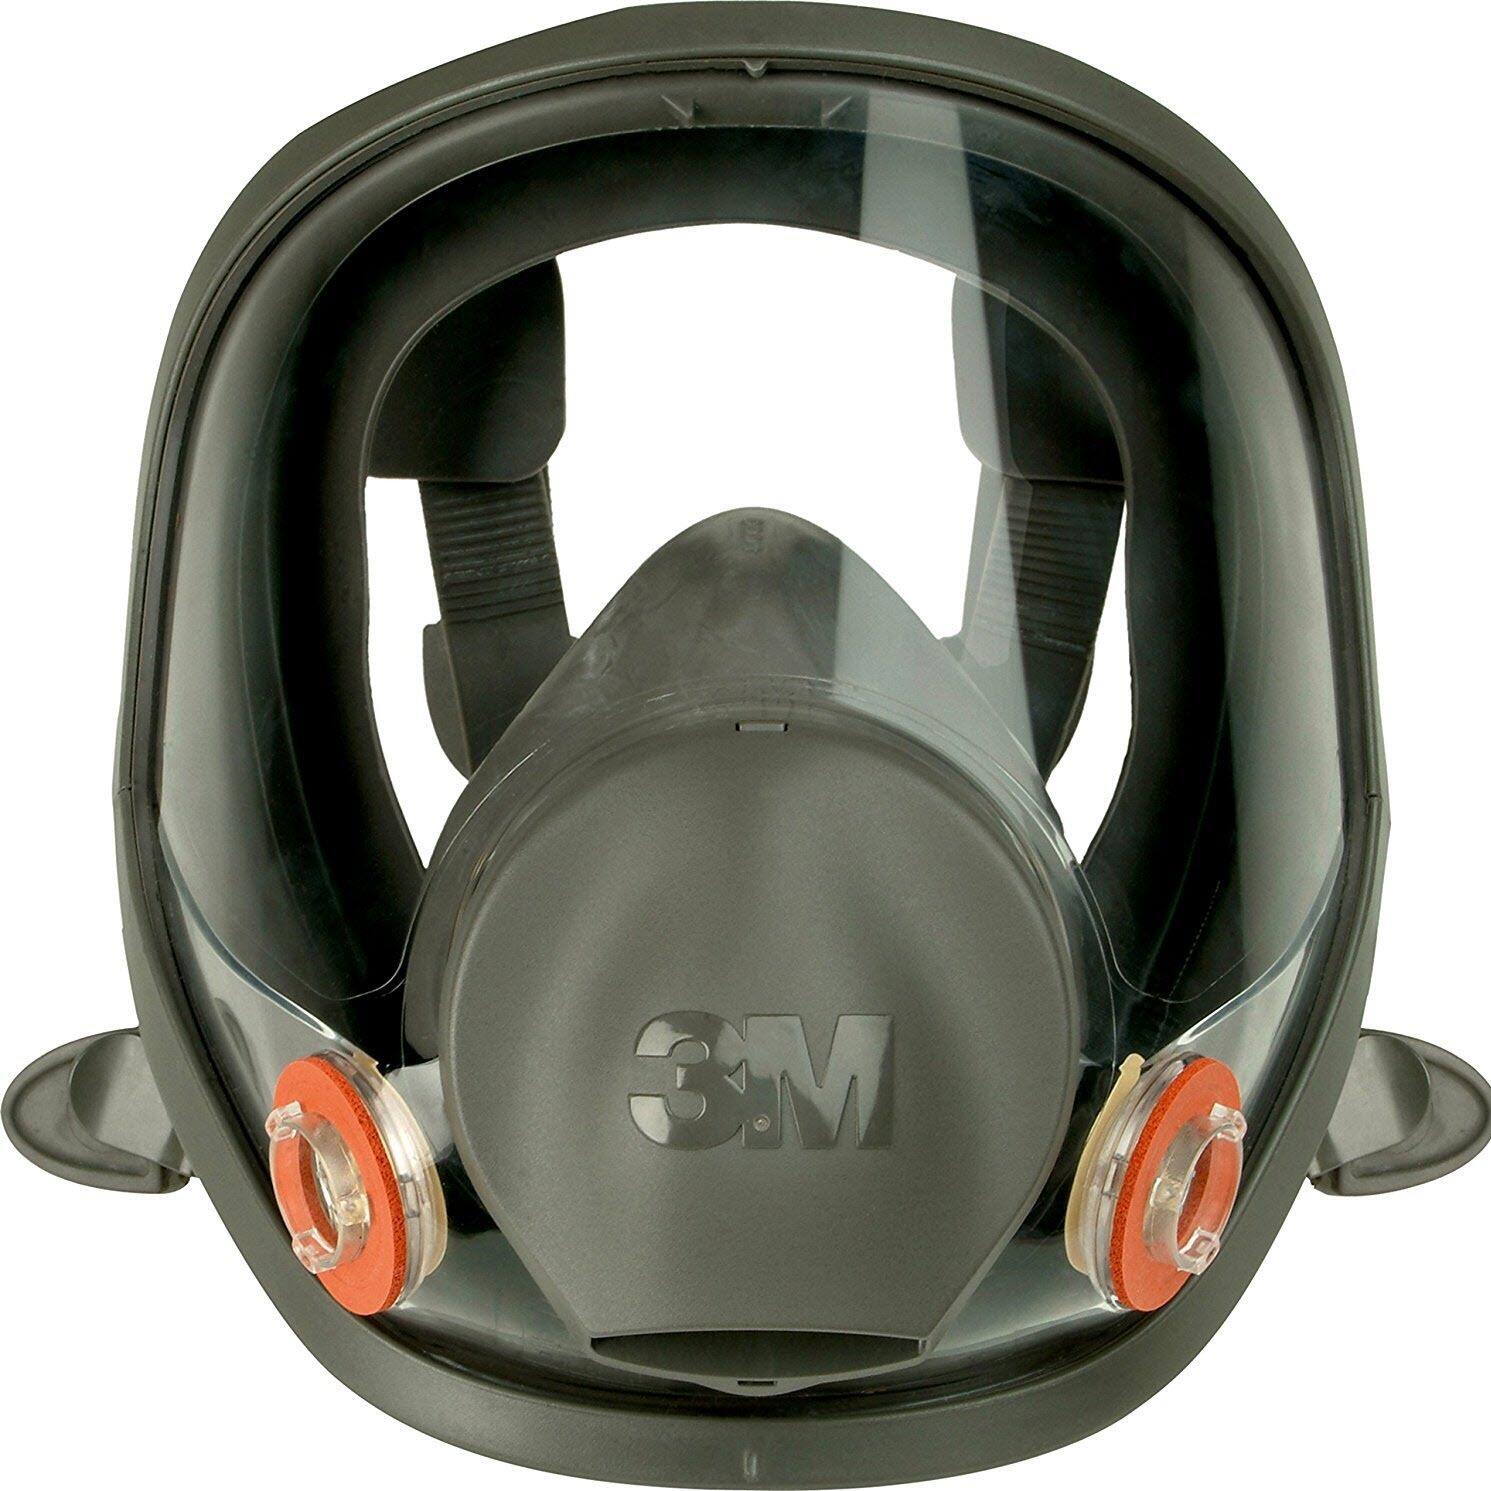 3M™ 6000 Series Reusable Full Face Respirator With Cool Flow™ Valve, Size LG